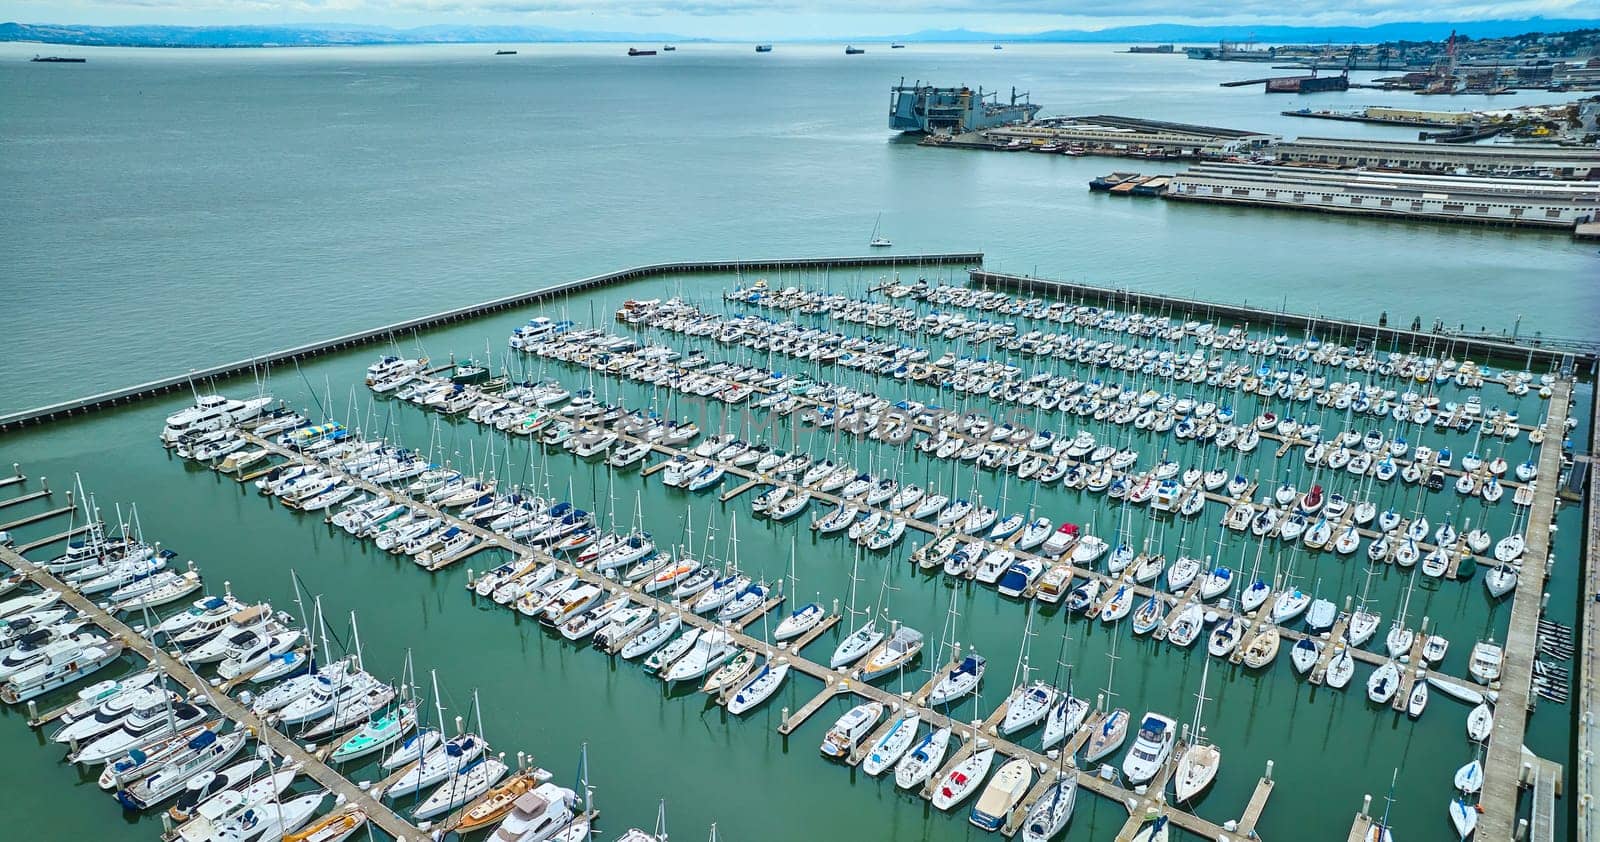 Image of Aerial South Beach Harbor with large tanker boats in San Francisco Bay